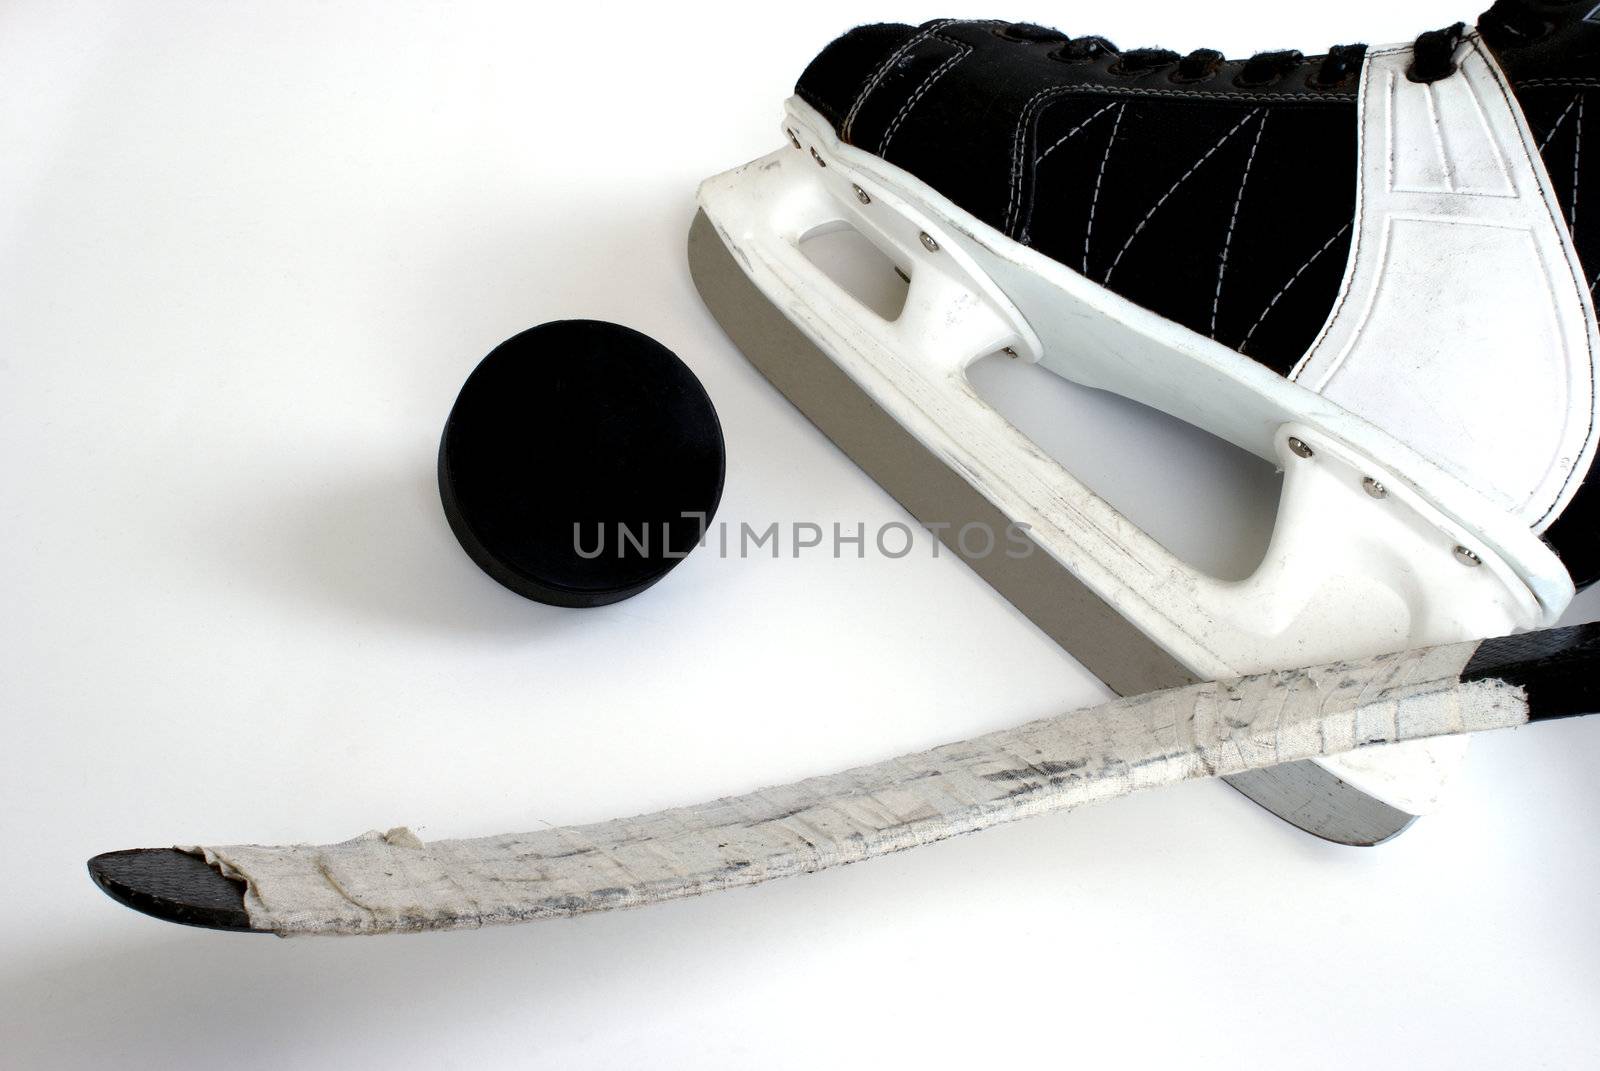 A hockey skate, puck and stick.